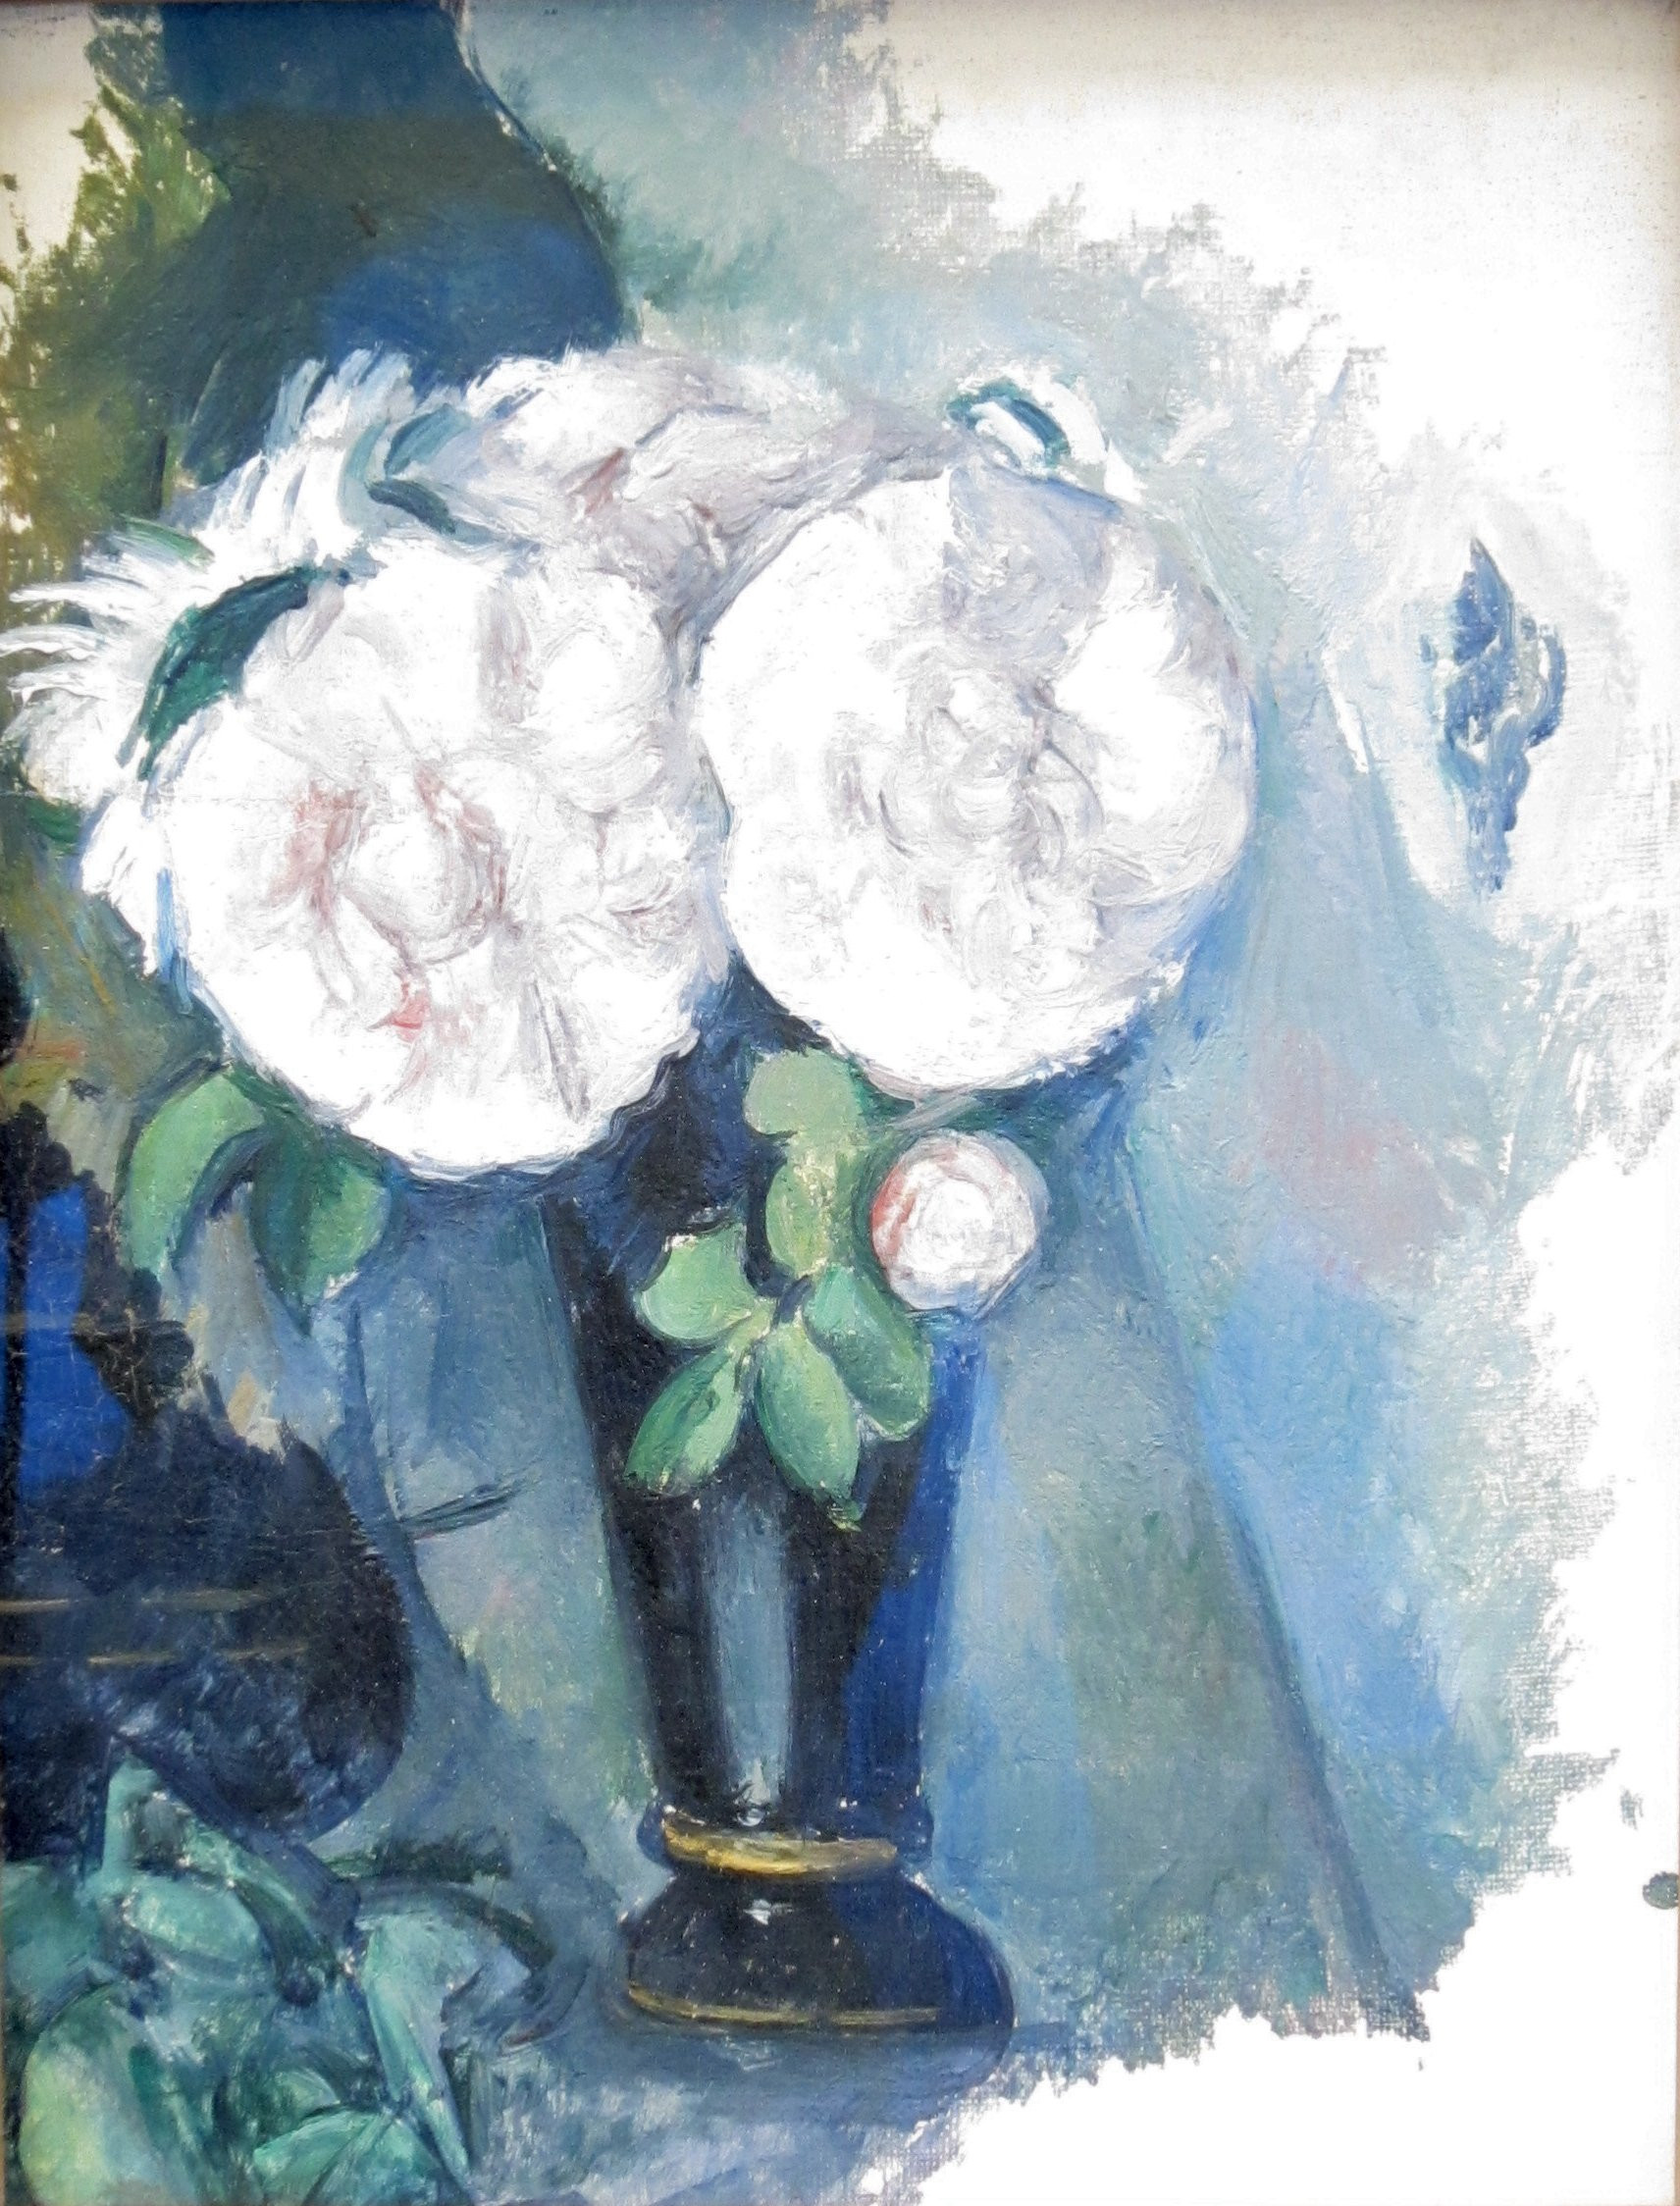 28 attractive the Blue Vase by Paul Cezanne original 2024 free download the blue vase by paul cezanne original of fileflowers in a blue vase by paul cazanne 1880 jpg wikimedia throughout fileflowers in a blue vase by paul cazanne 1880 jpg